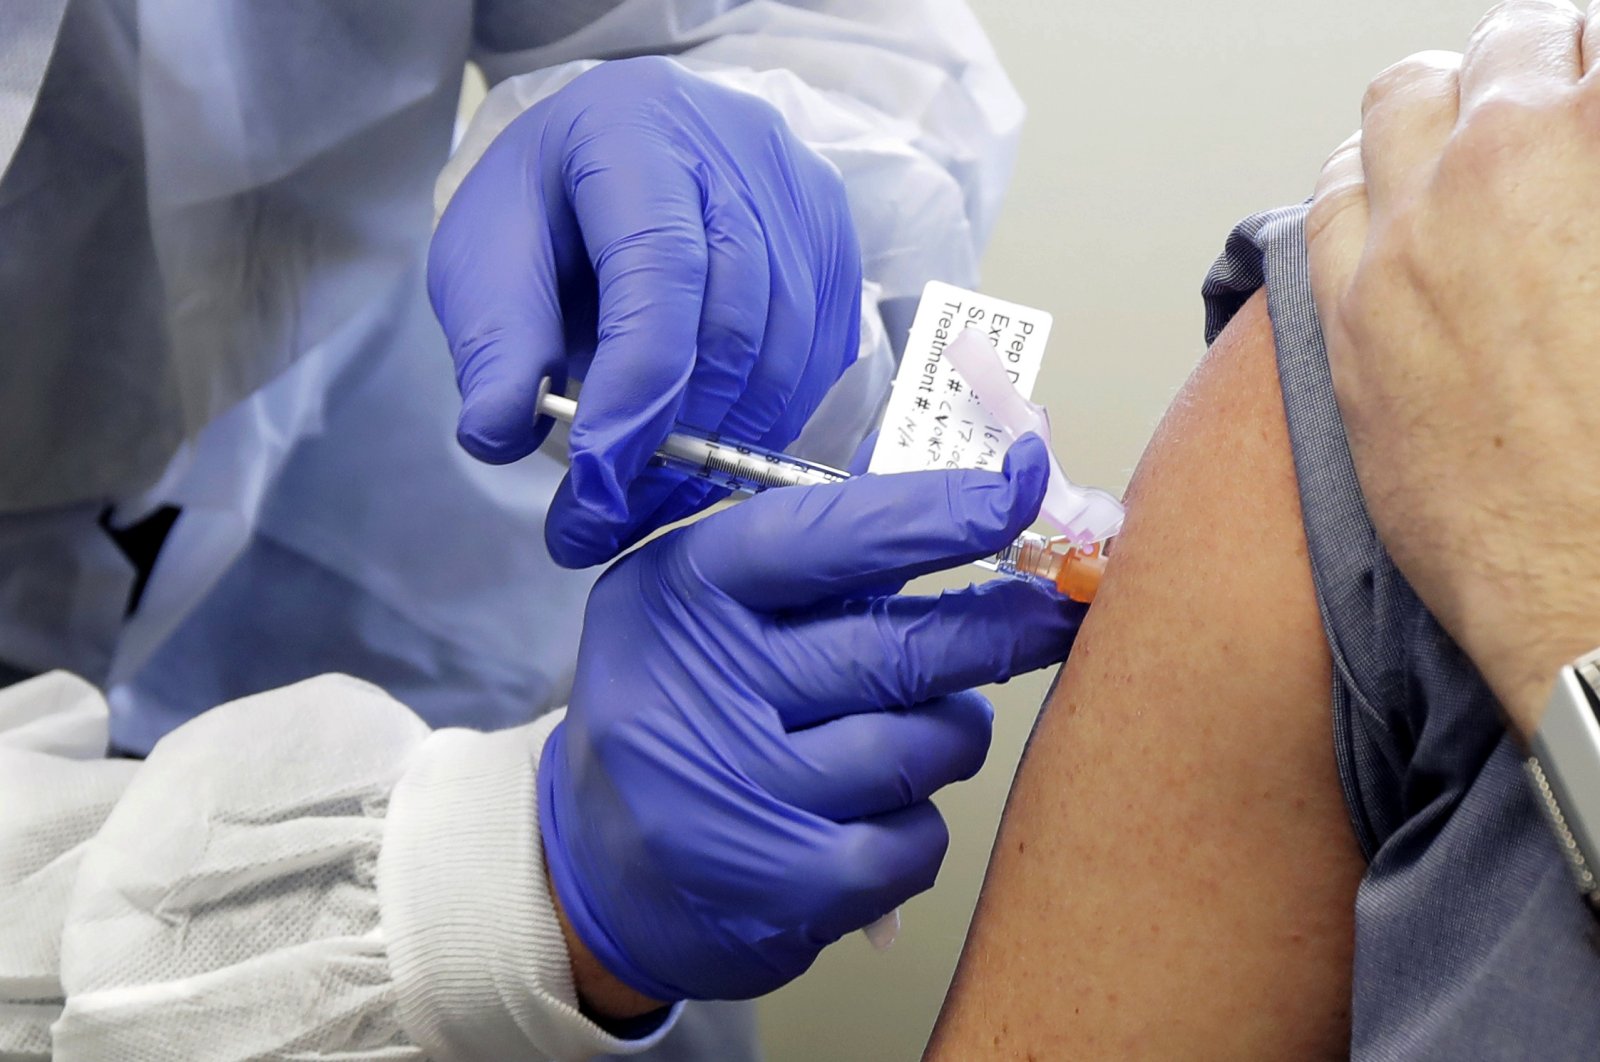 Neal Browning receives a shot in the first-stage safety study clinical trial of a potential vaccine for COVID-19, the disease caused by the new coronavirus, Monday, March 16, 2020, at the Kaiser Permanente Washington Health Research Institute in Seattle. (AP Photo)